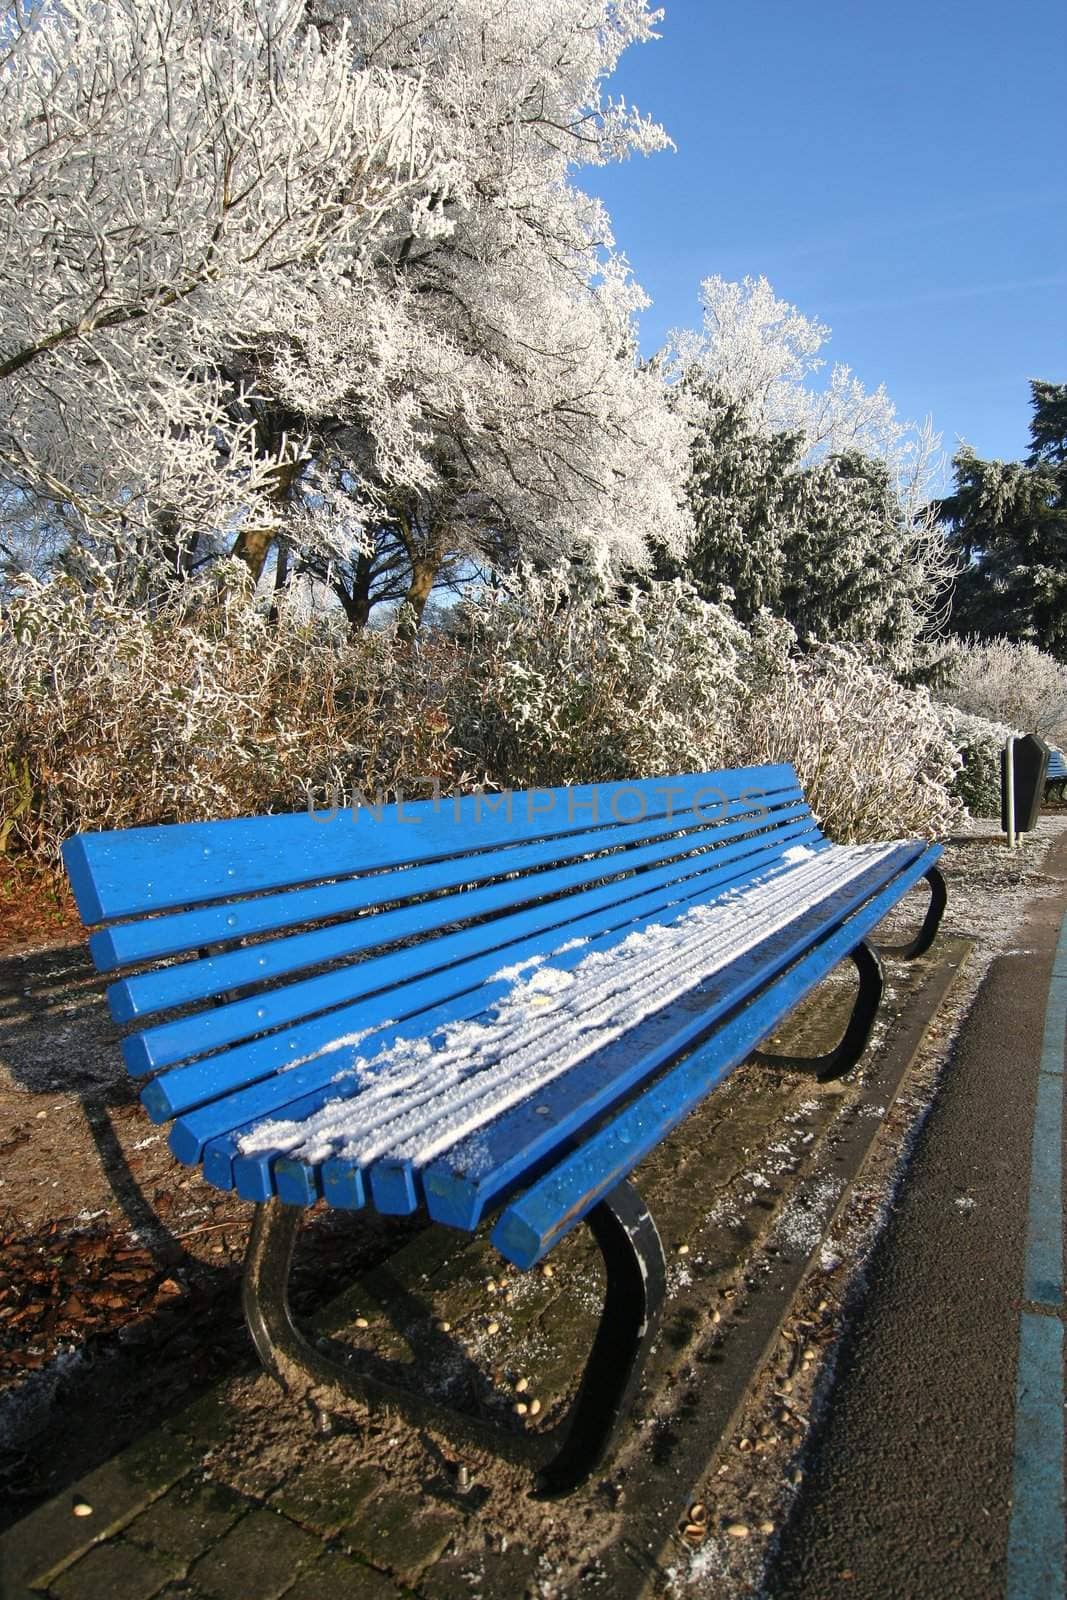 Bench in the park in winter, trees white with frost